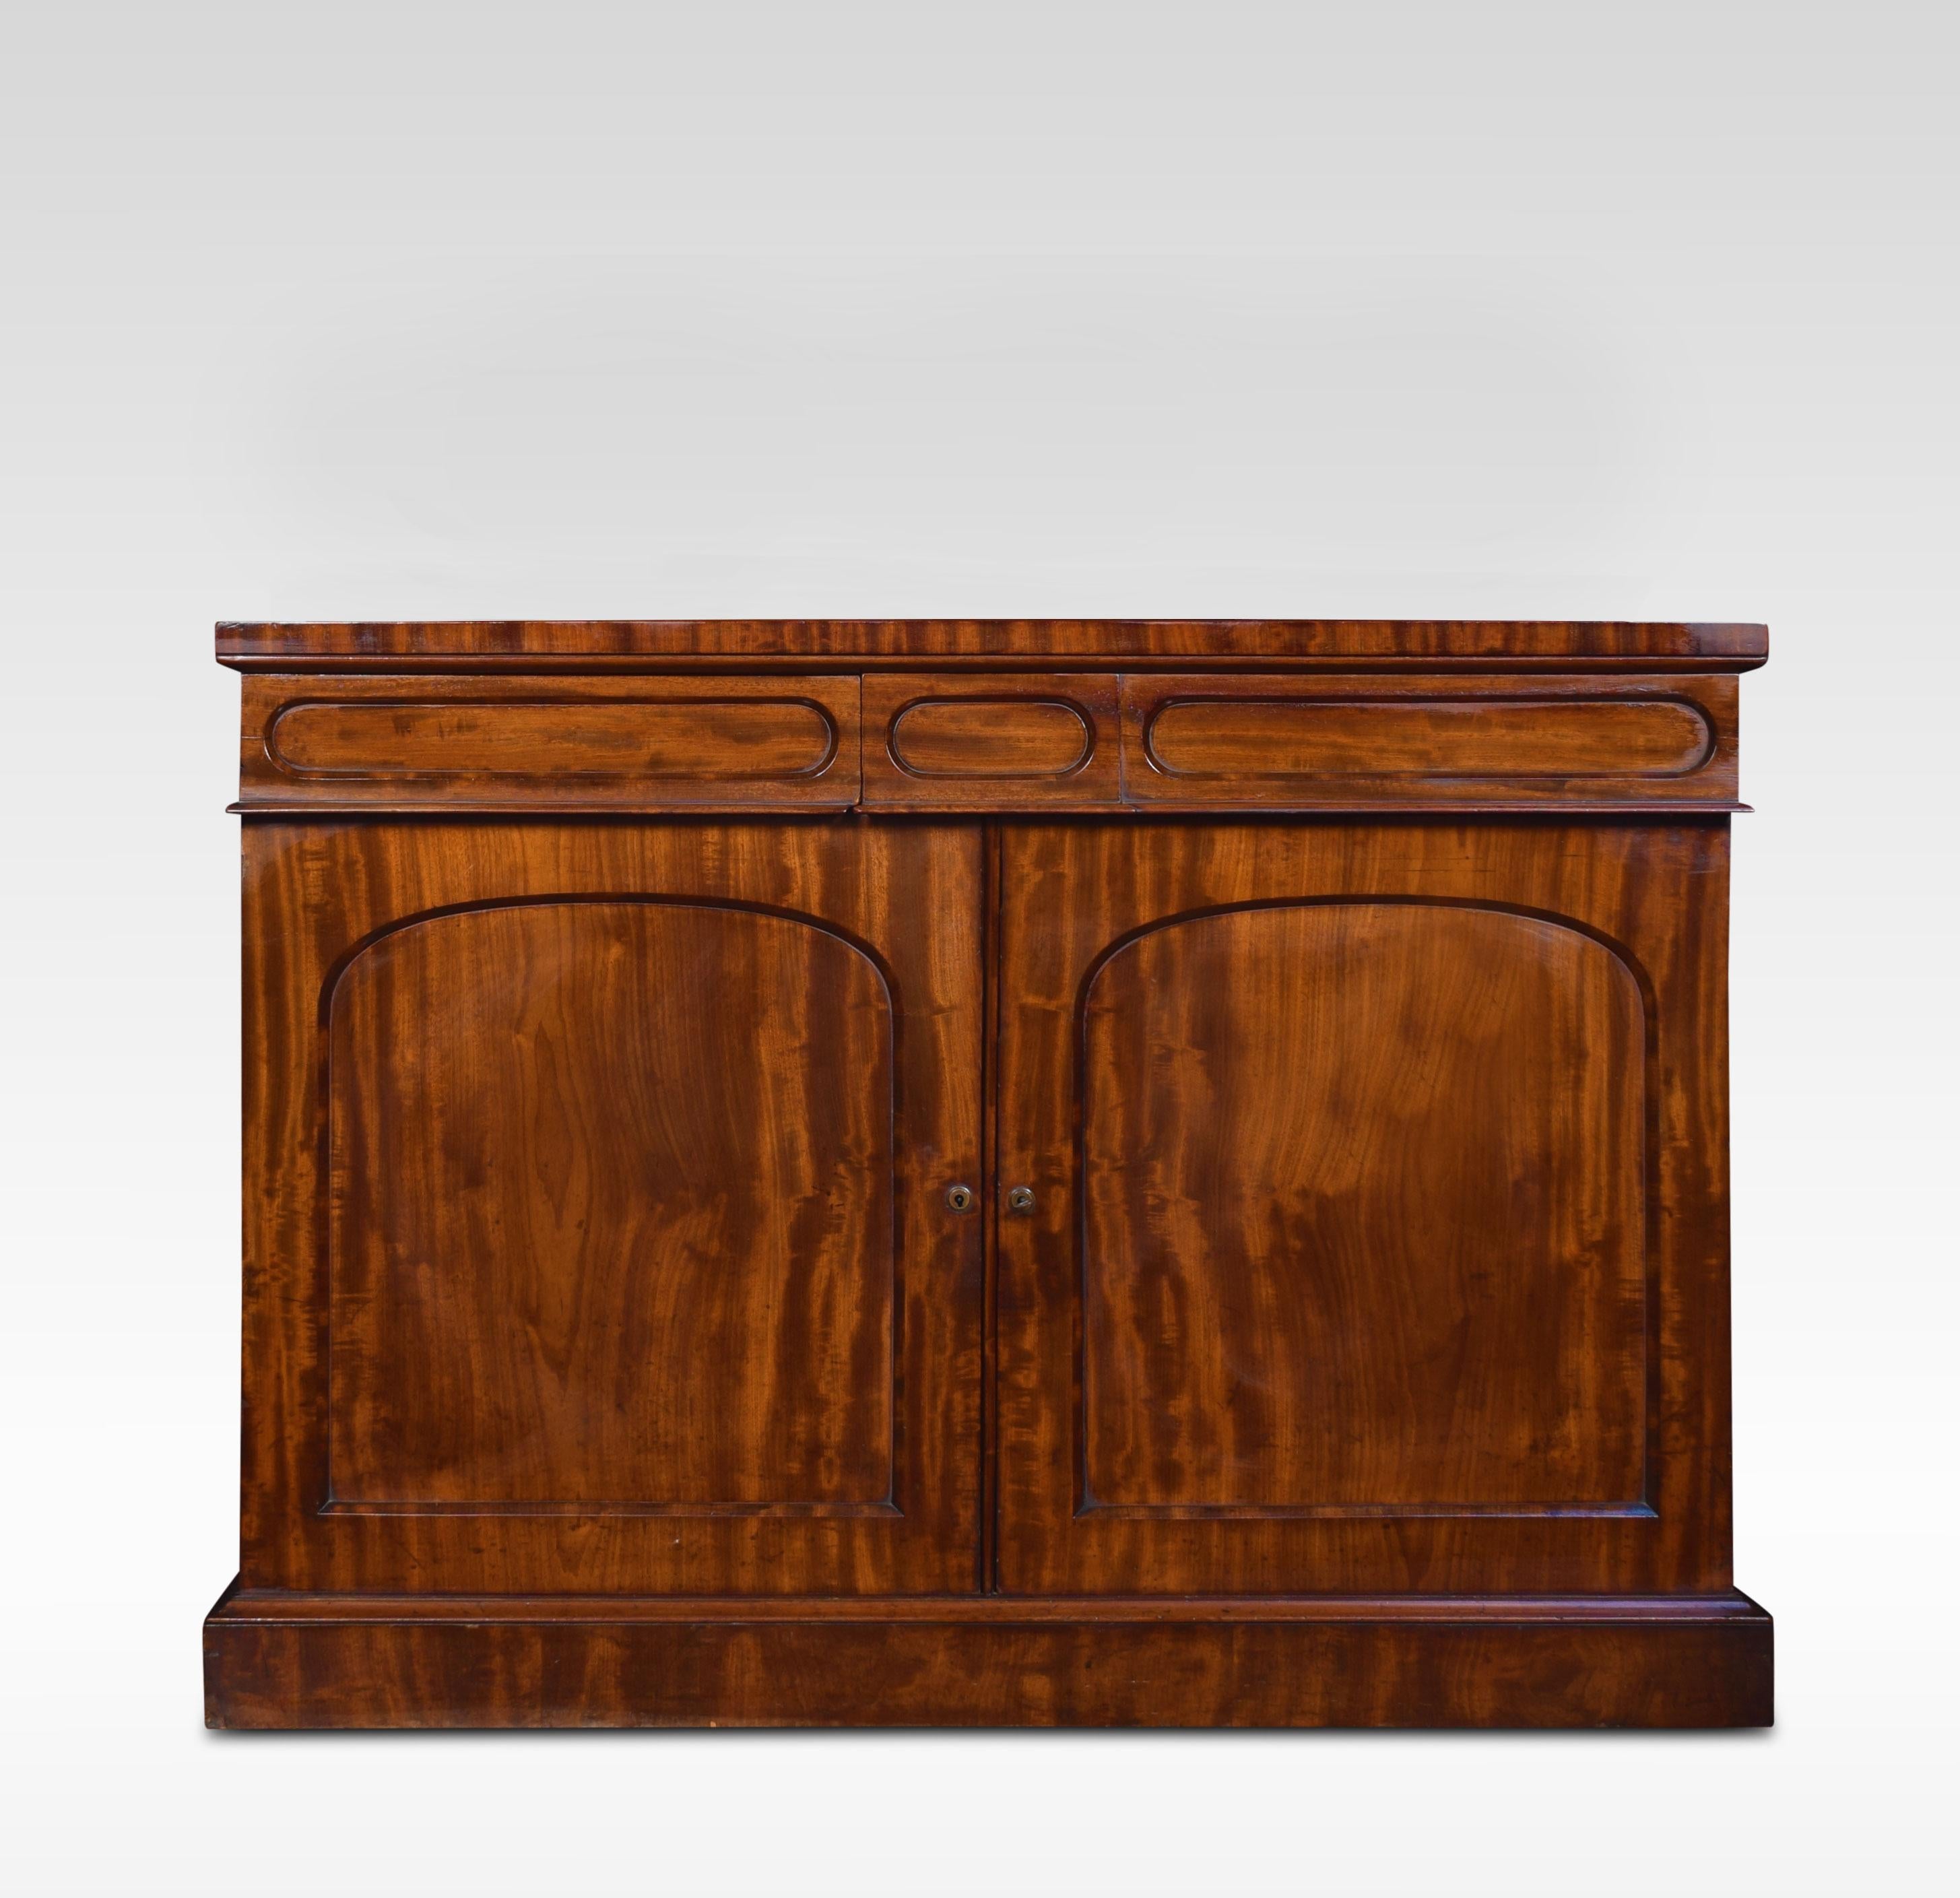 William IV mahogany chiffonier, the raised gallery back with carved foliated decoration above the central oval mirror. The large rectangular well figured top above a moulded frieze fitted with two drawers and a pair of panel doors below opening to